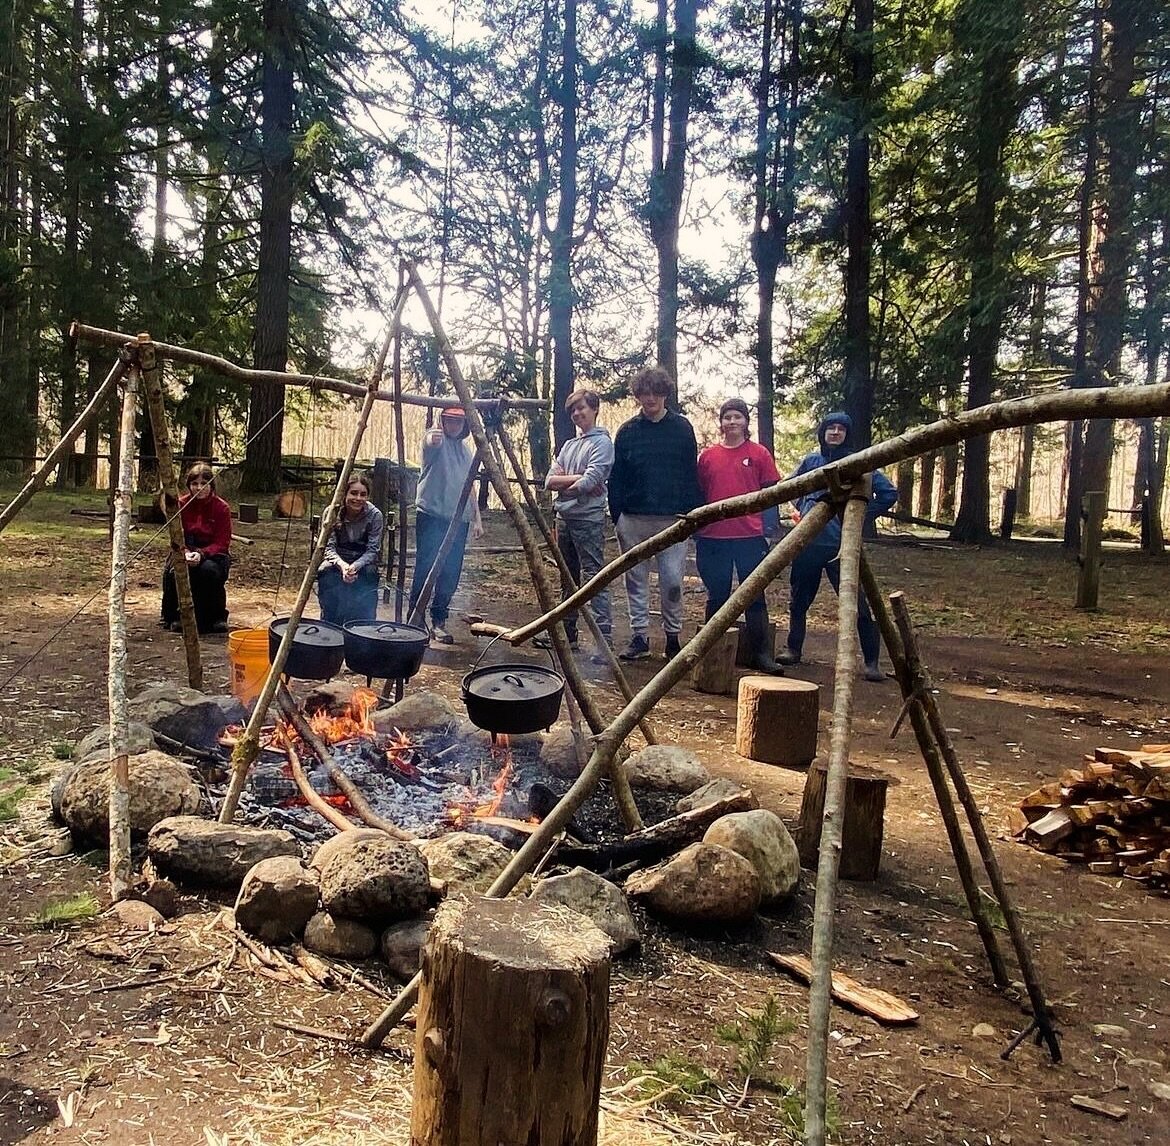 The 8th grade class of 2023 designed cooking systems and made dinner during one of their overnight expeditions!
🌿
#forestschool #outdooreducation #handsonlearning #projectbasedlearning #middleschool #camping #outdoorcooking #pdxforestschool #portlan